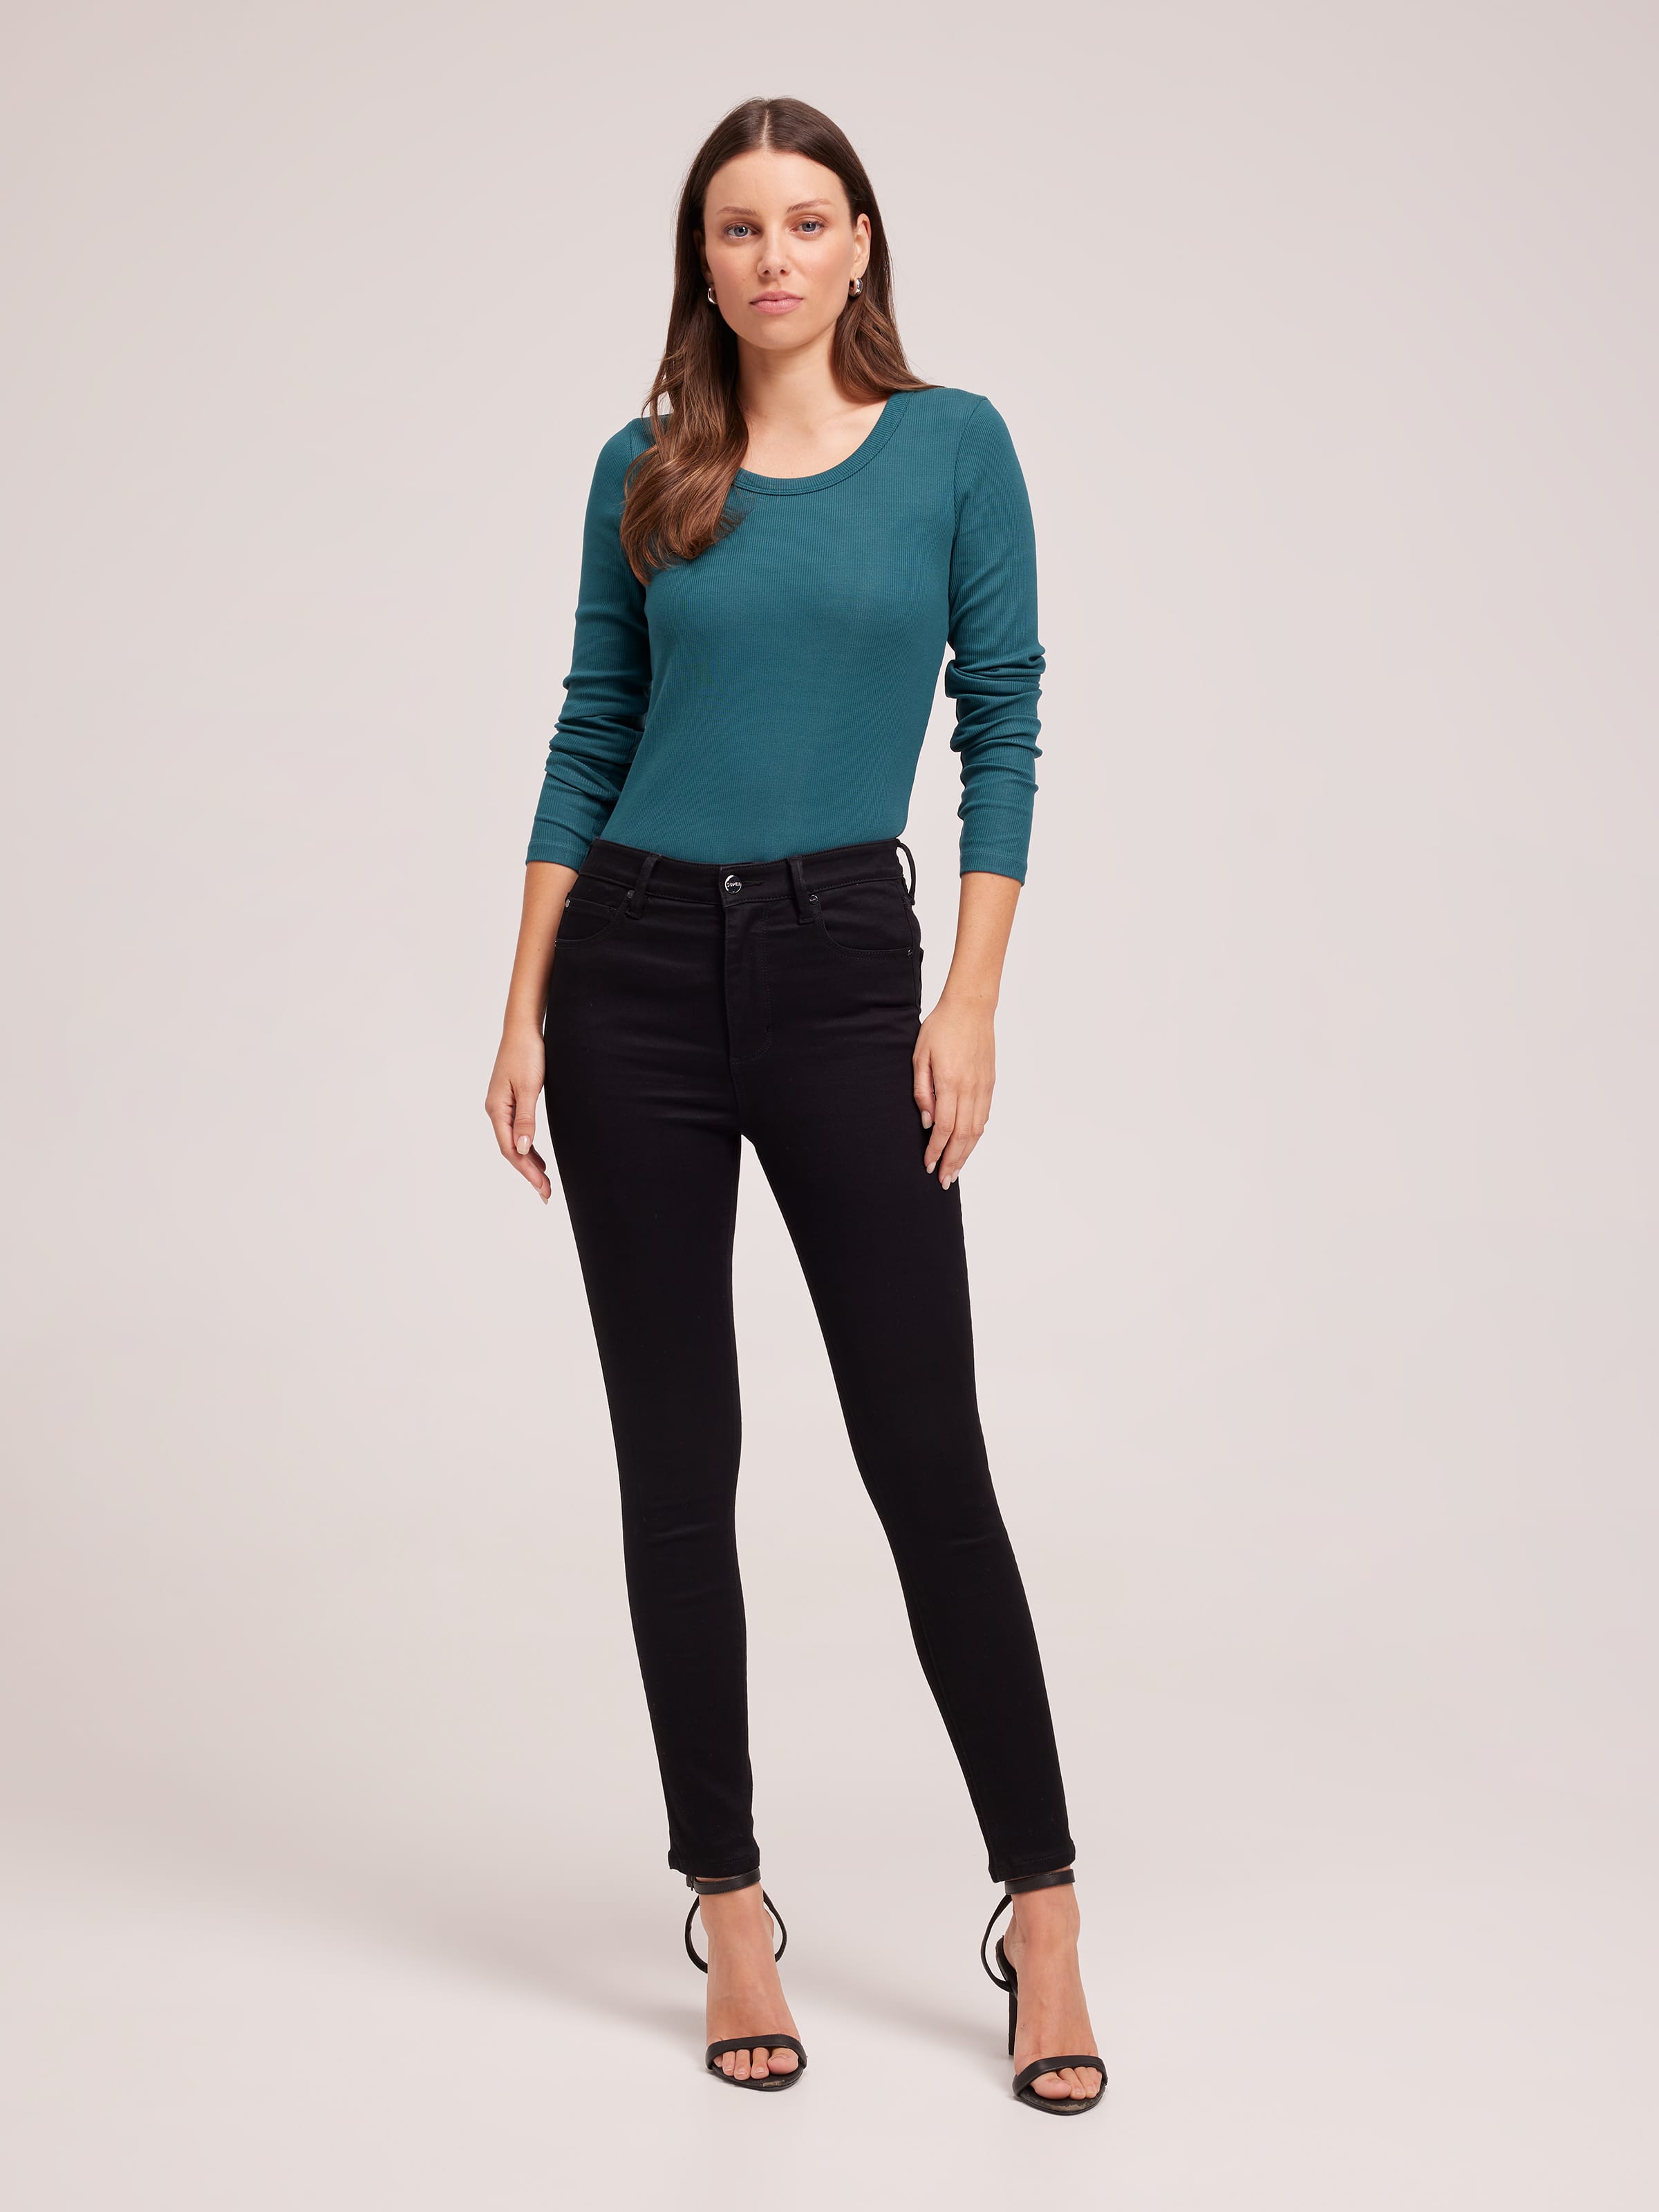 High Waisted Mom Jean In Now You Know - Just Jeans Online